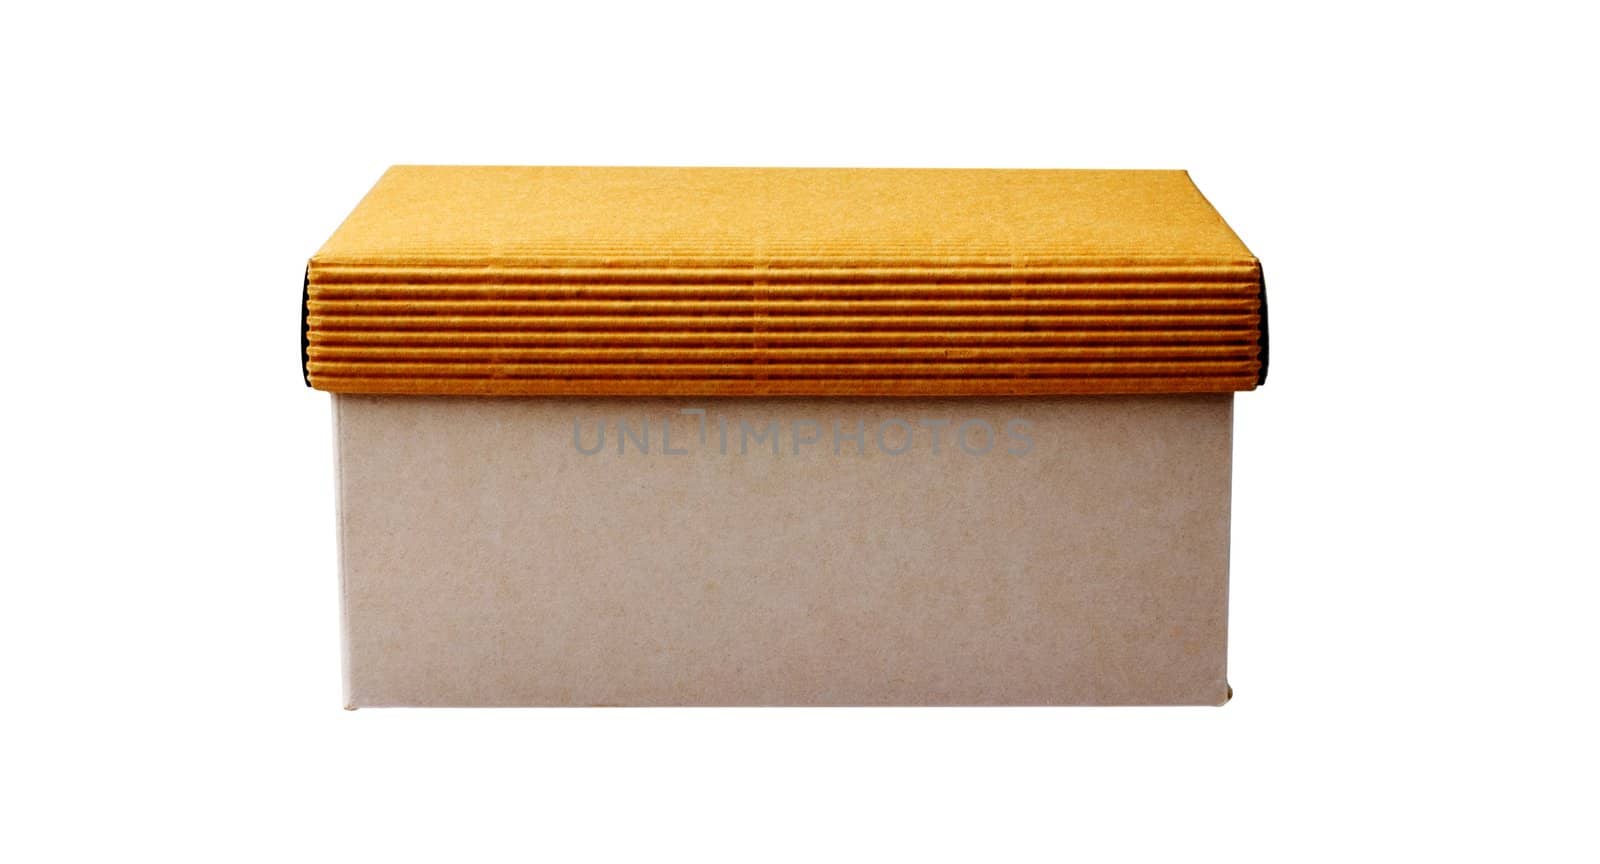 Closed cardboard box isolated on white